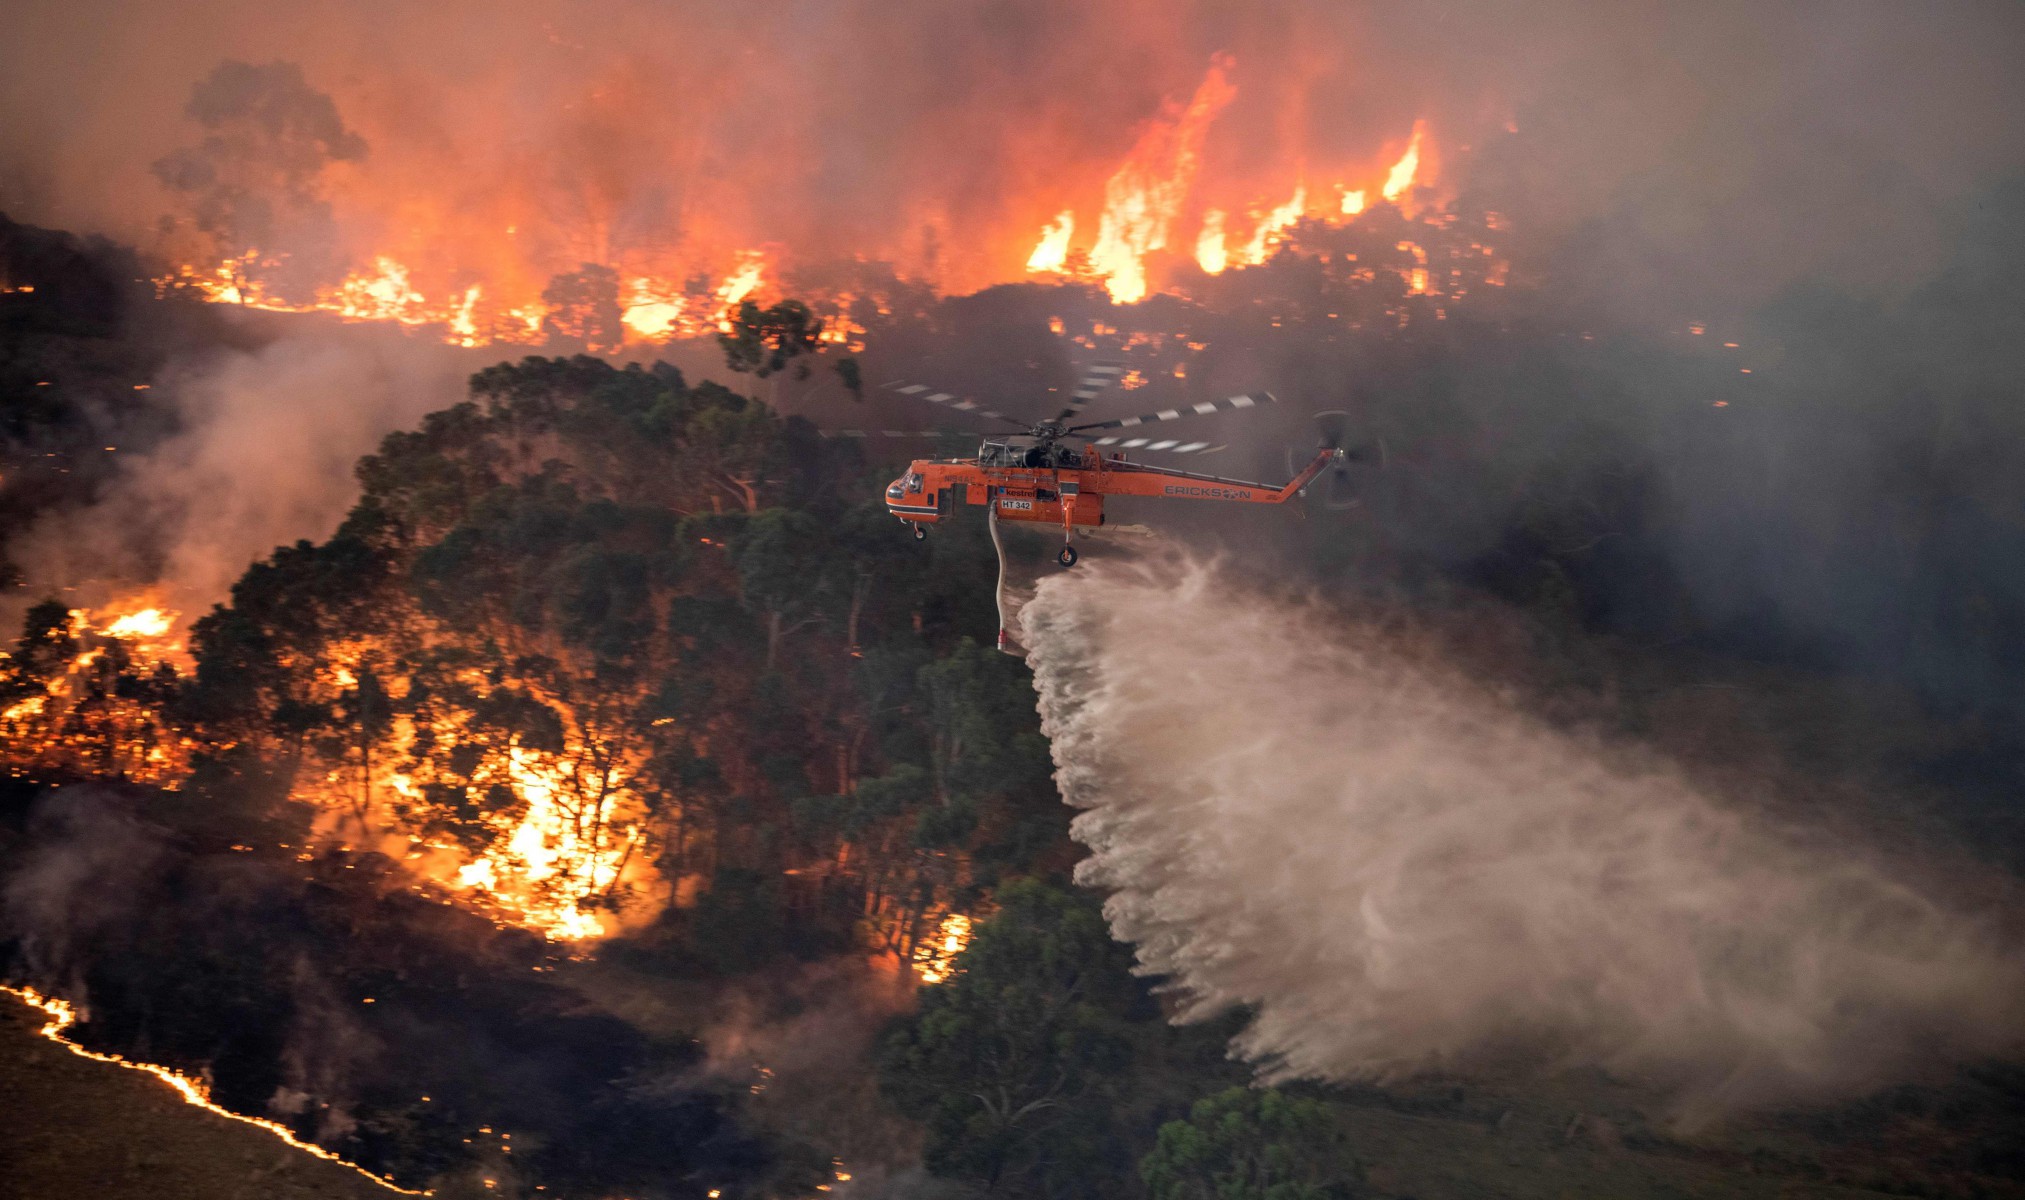  A helicopter drops tonnes of water on burning bushland